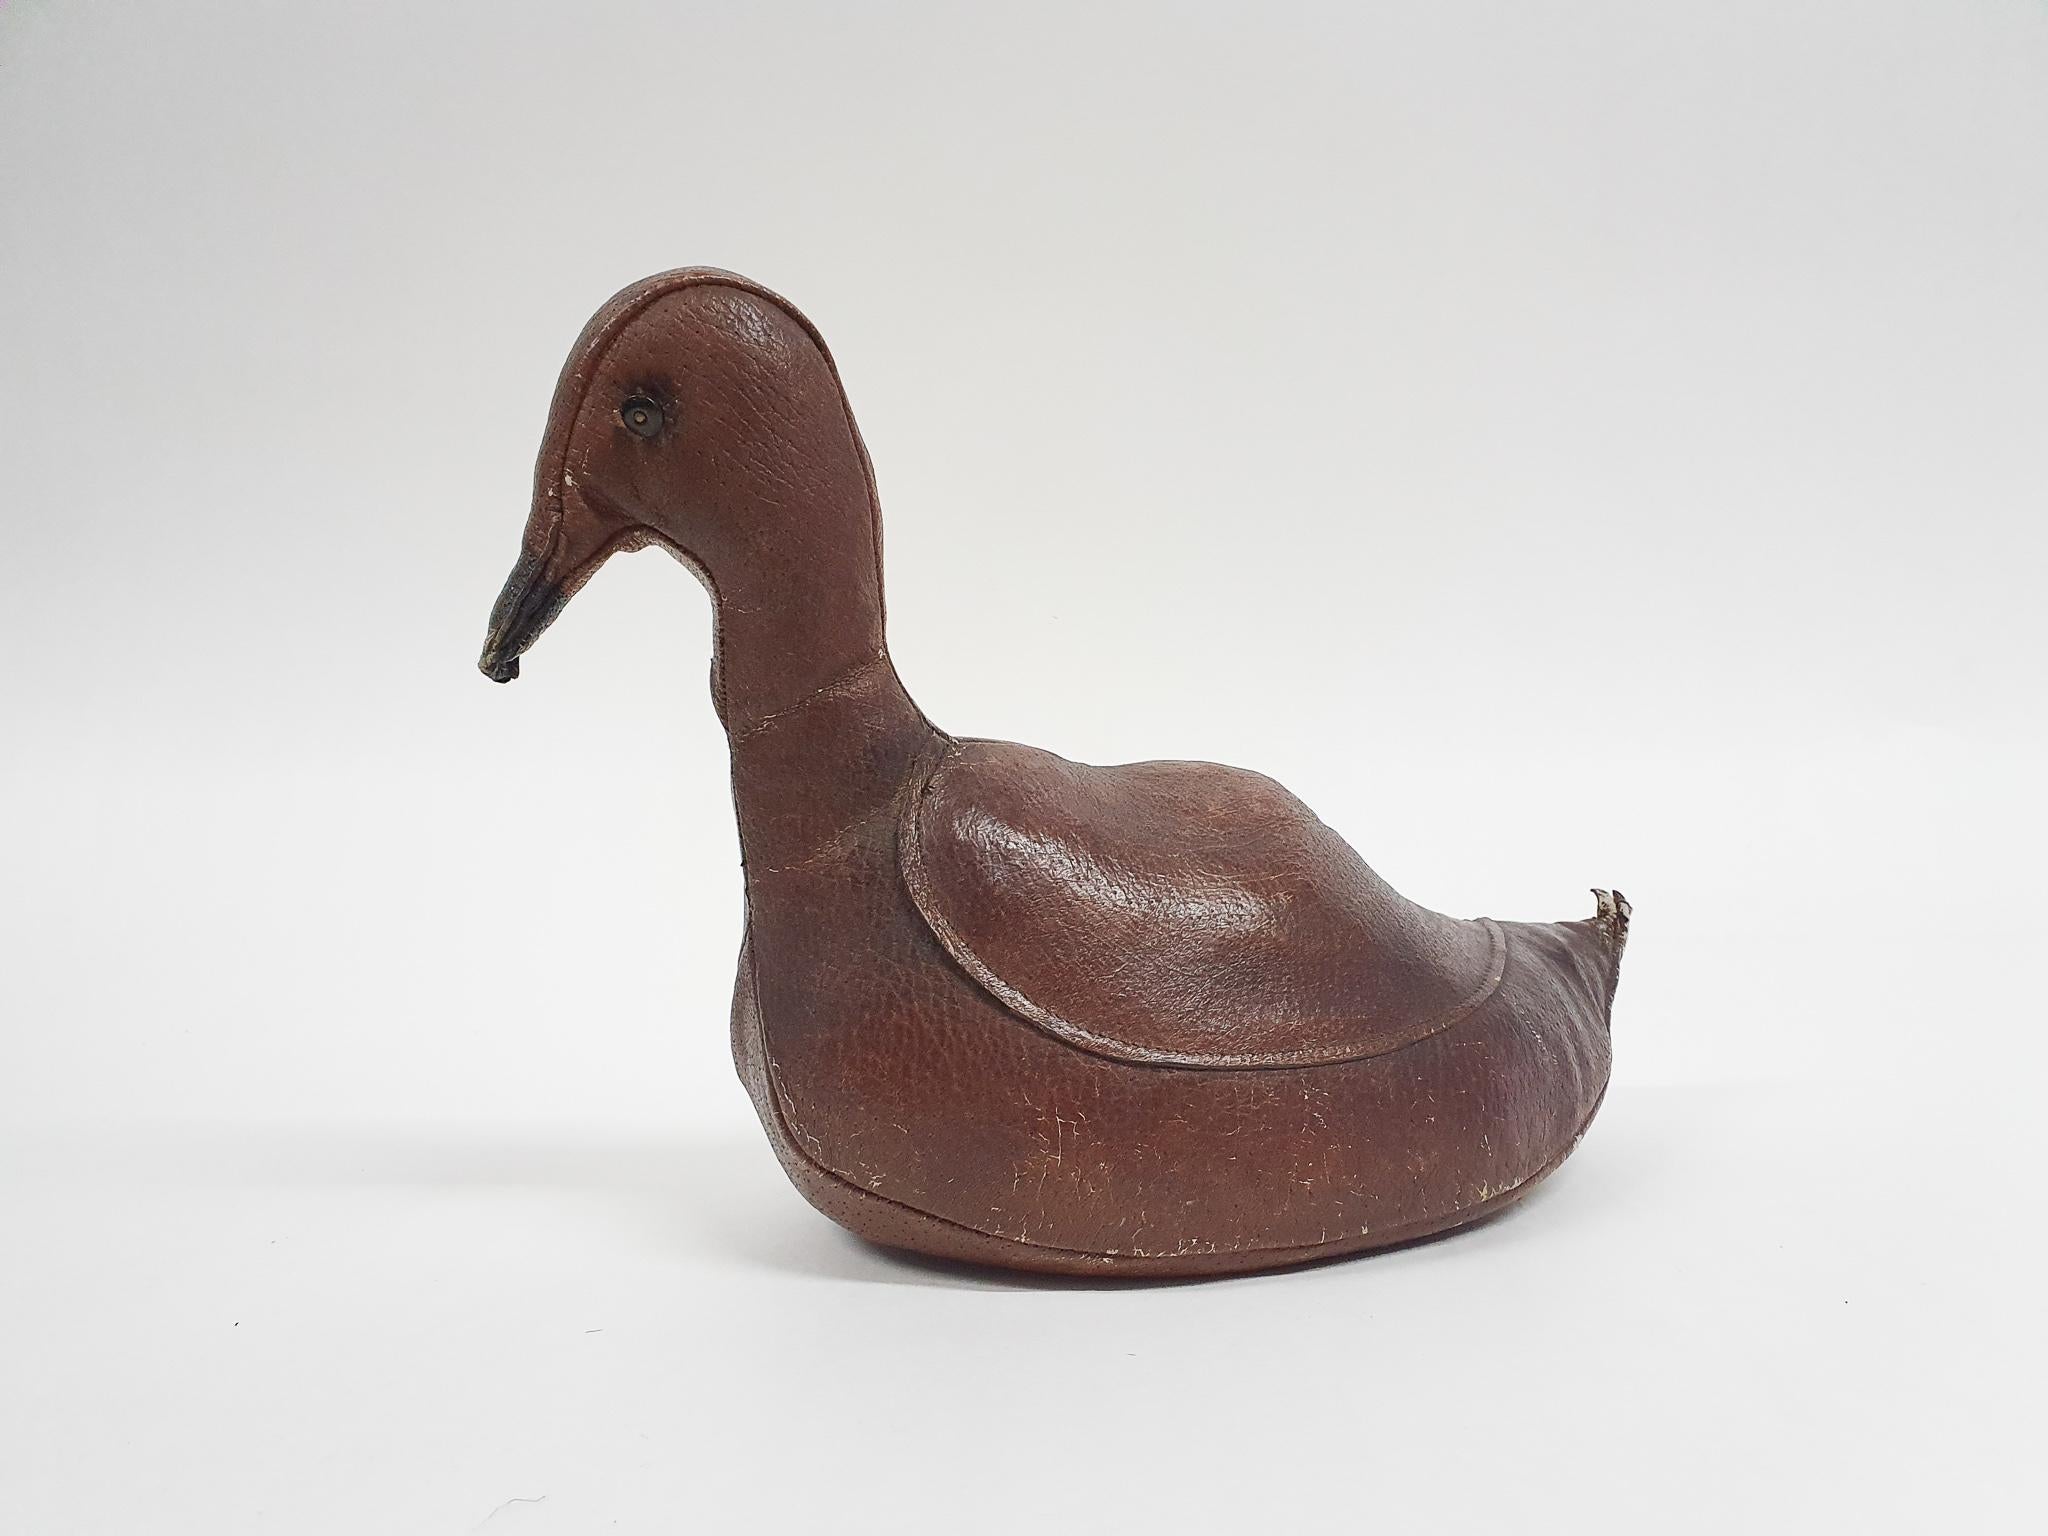 Leather duck stuffed with straw by Dimitri Omersa. The duck can be used as a door stop or as a decorative item in a kids room.
It has traces of use.